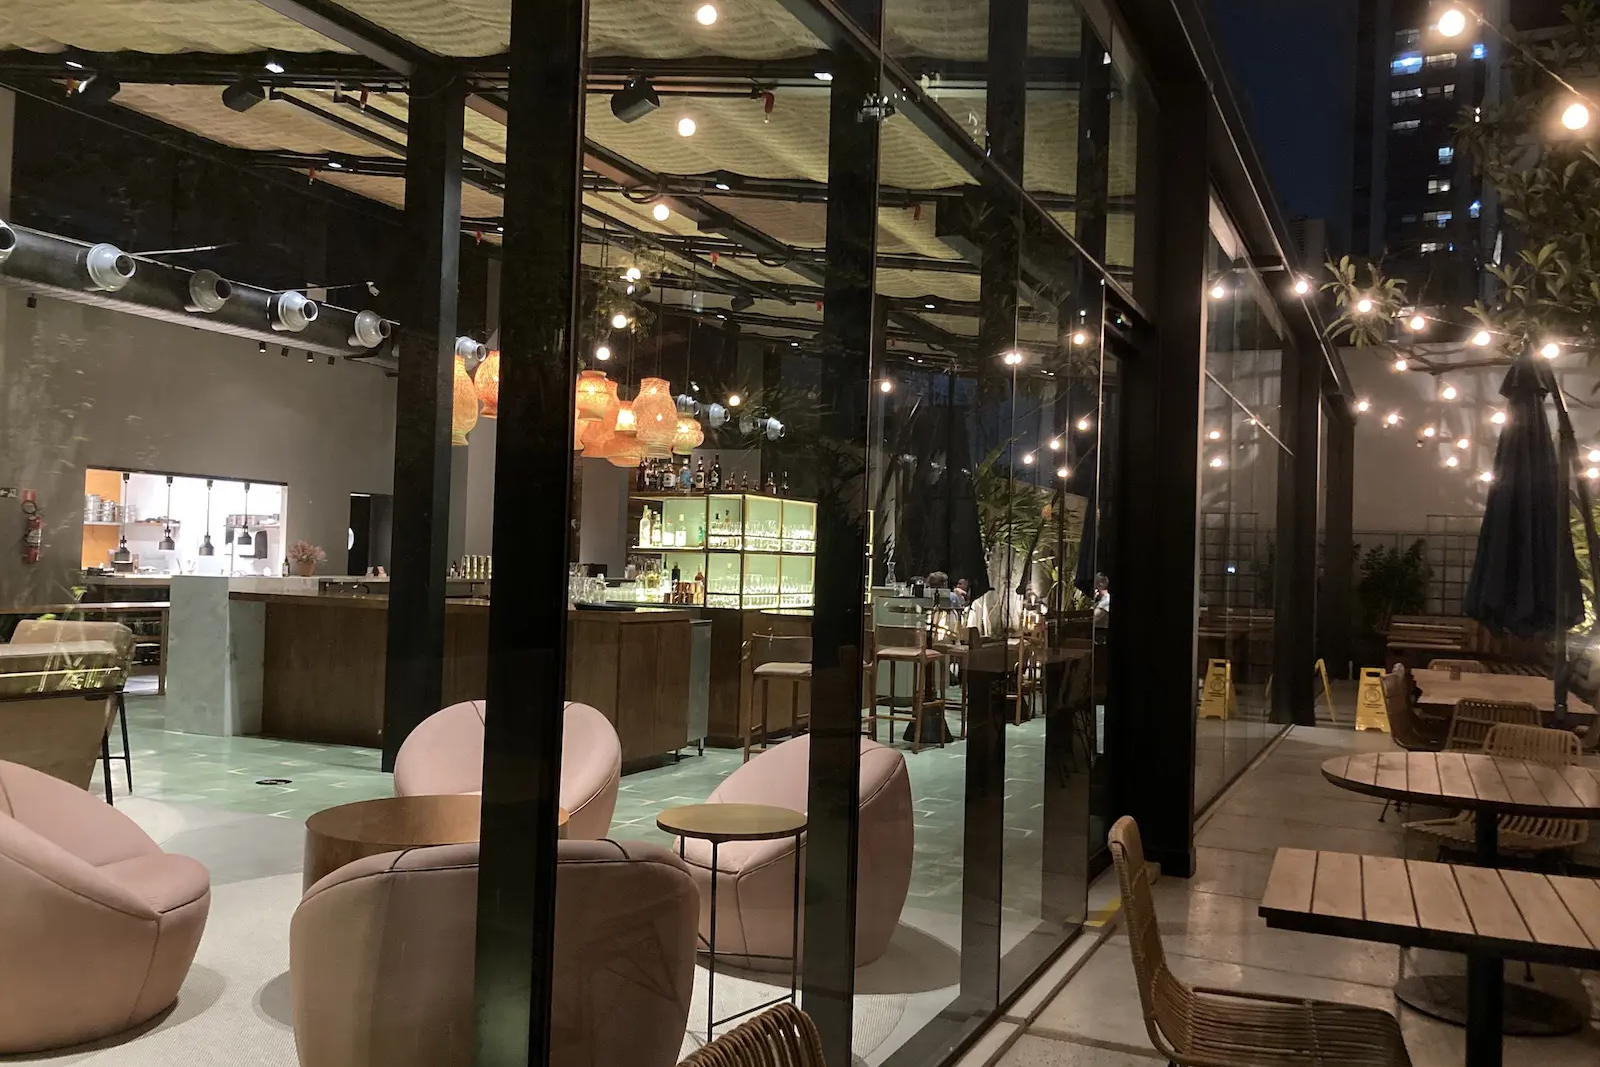 view from outdoor dining area through a window to the indoor dining area at a hotel